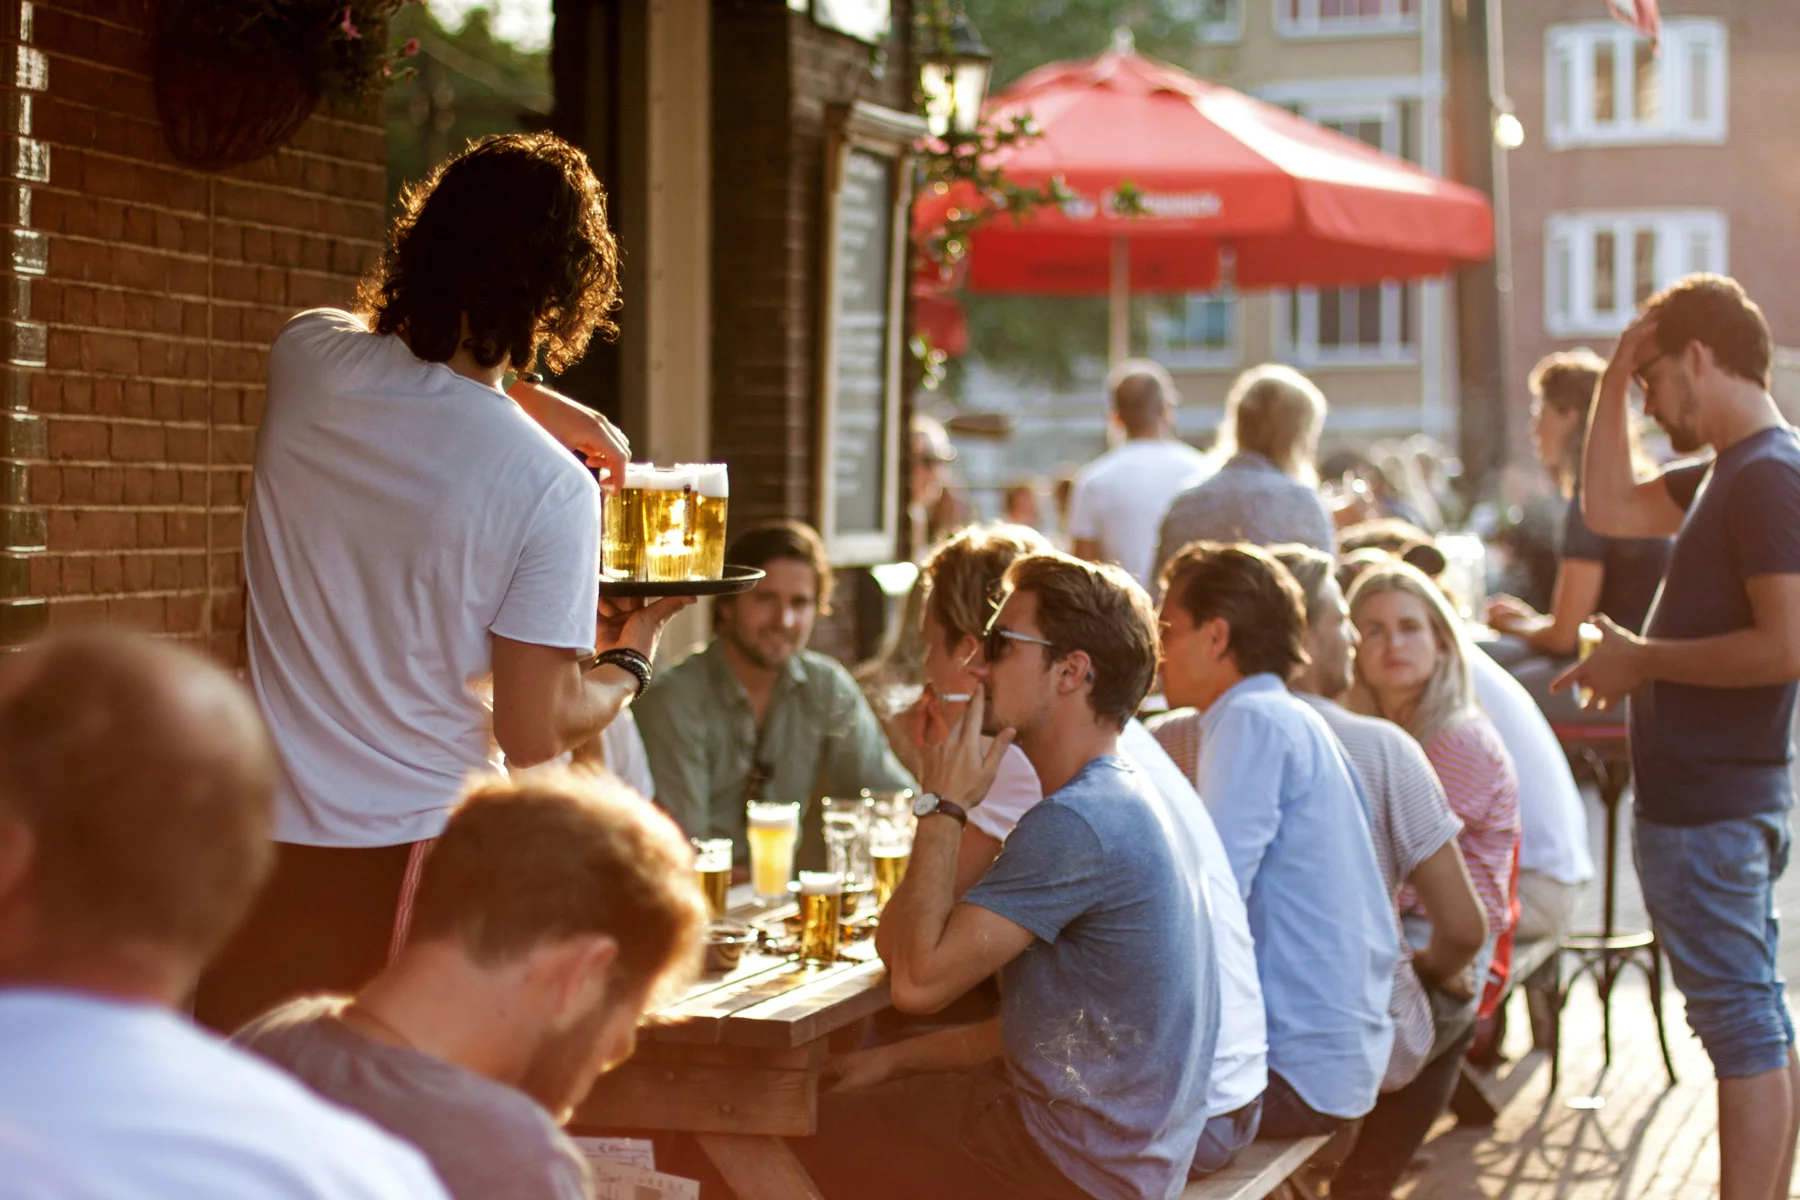 A group meeting for drinks on an outdoor terrace